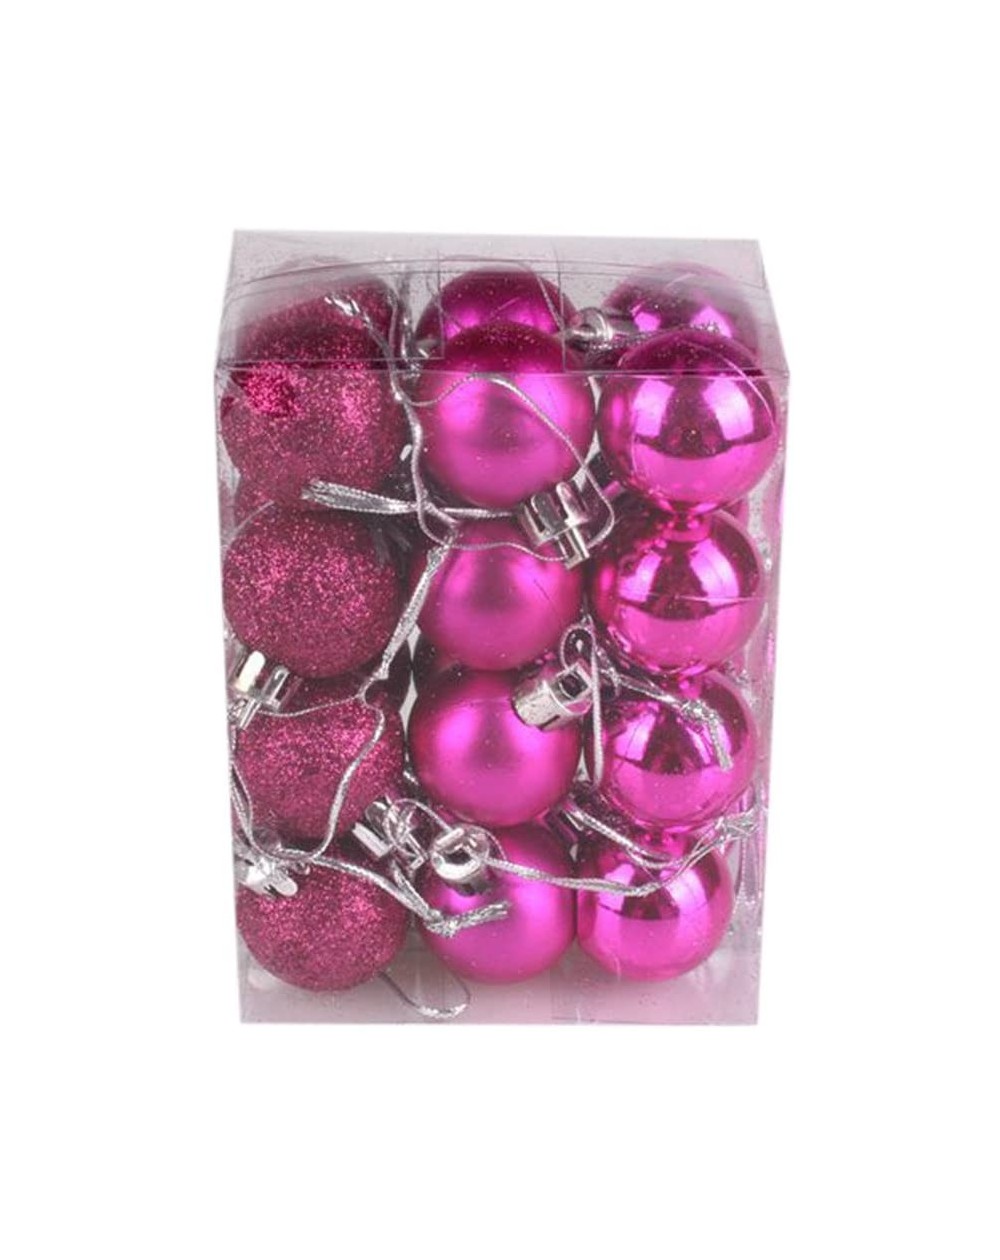 Ornaments Christmas Balls Ornaments for Xmas Tree - 24Pcs Mini Christmas Decorations Tree Balls Hanging Baubles for Holiday W...